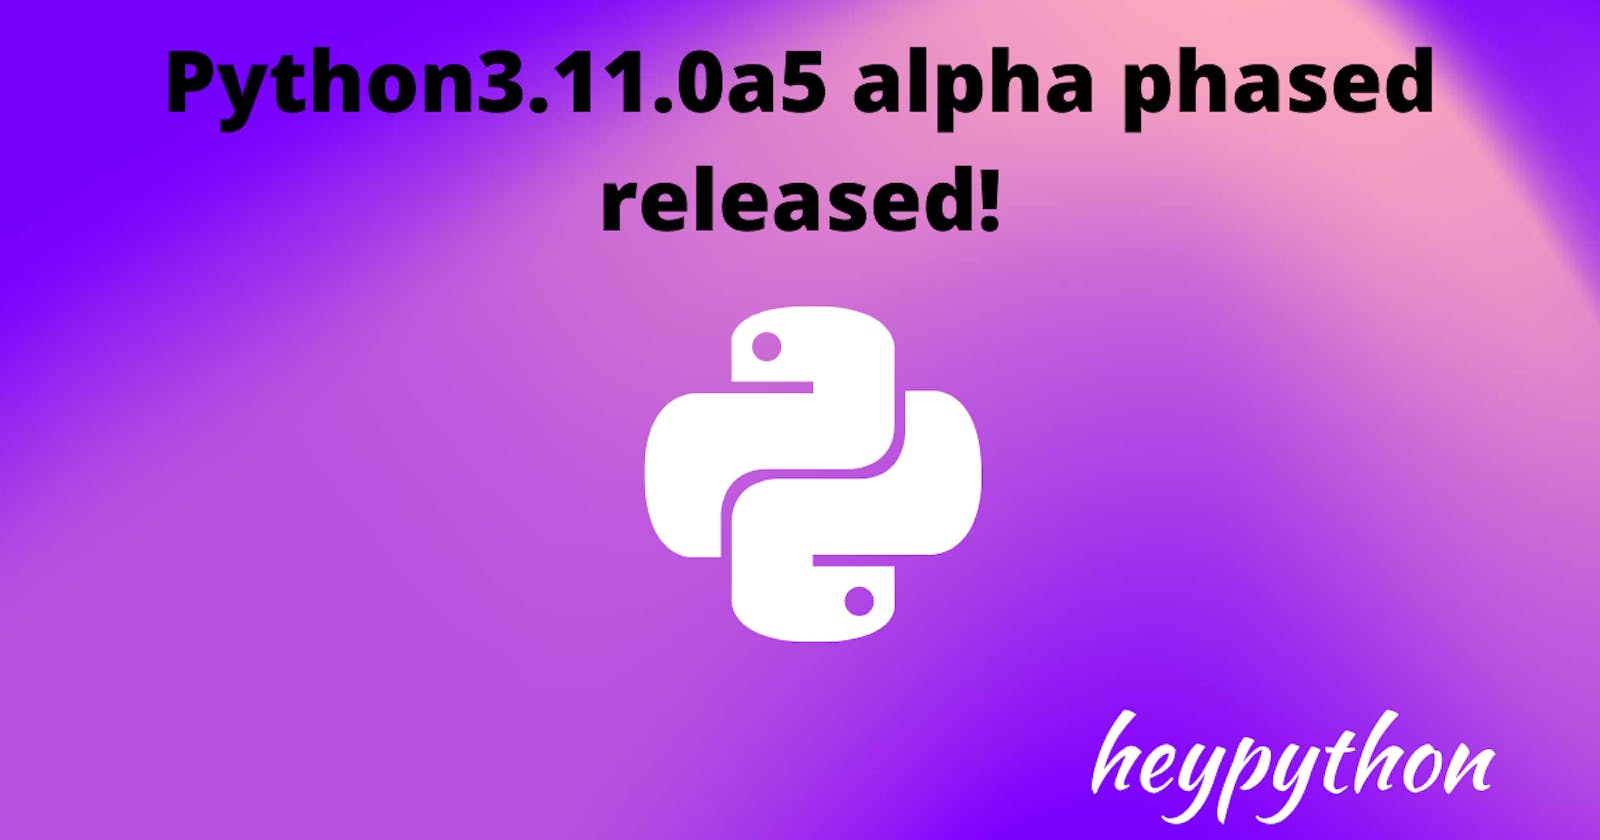 Python 3.11.0a5(alpha phase) is now available what it means?